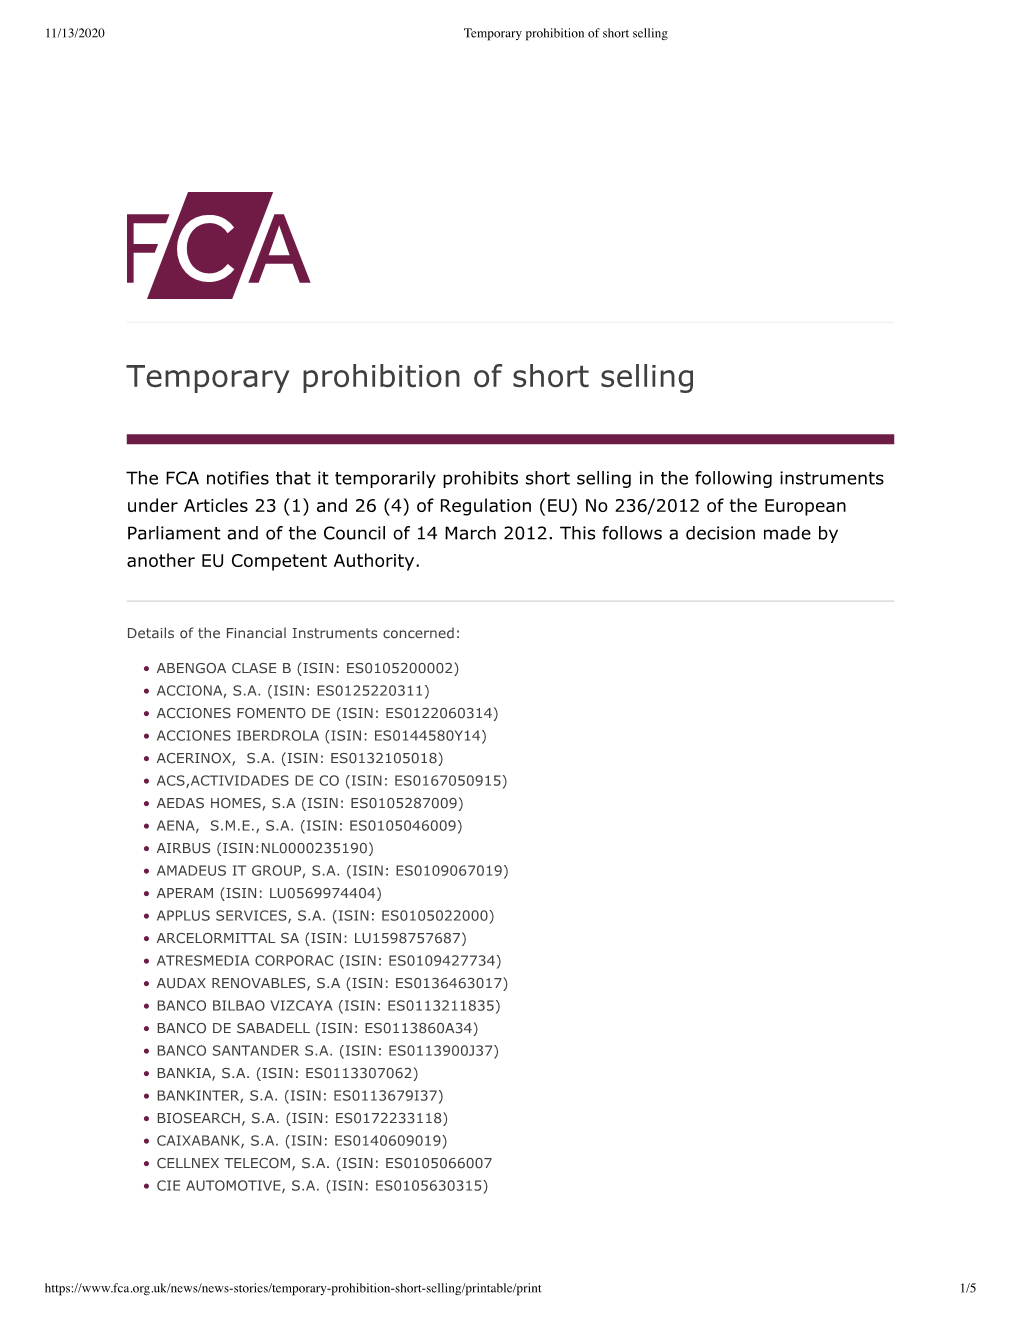 Temporary Prohibition of Short Selling